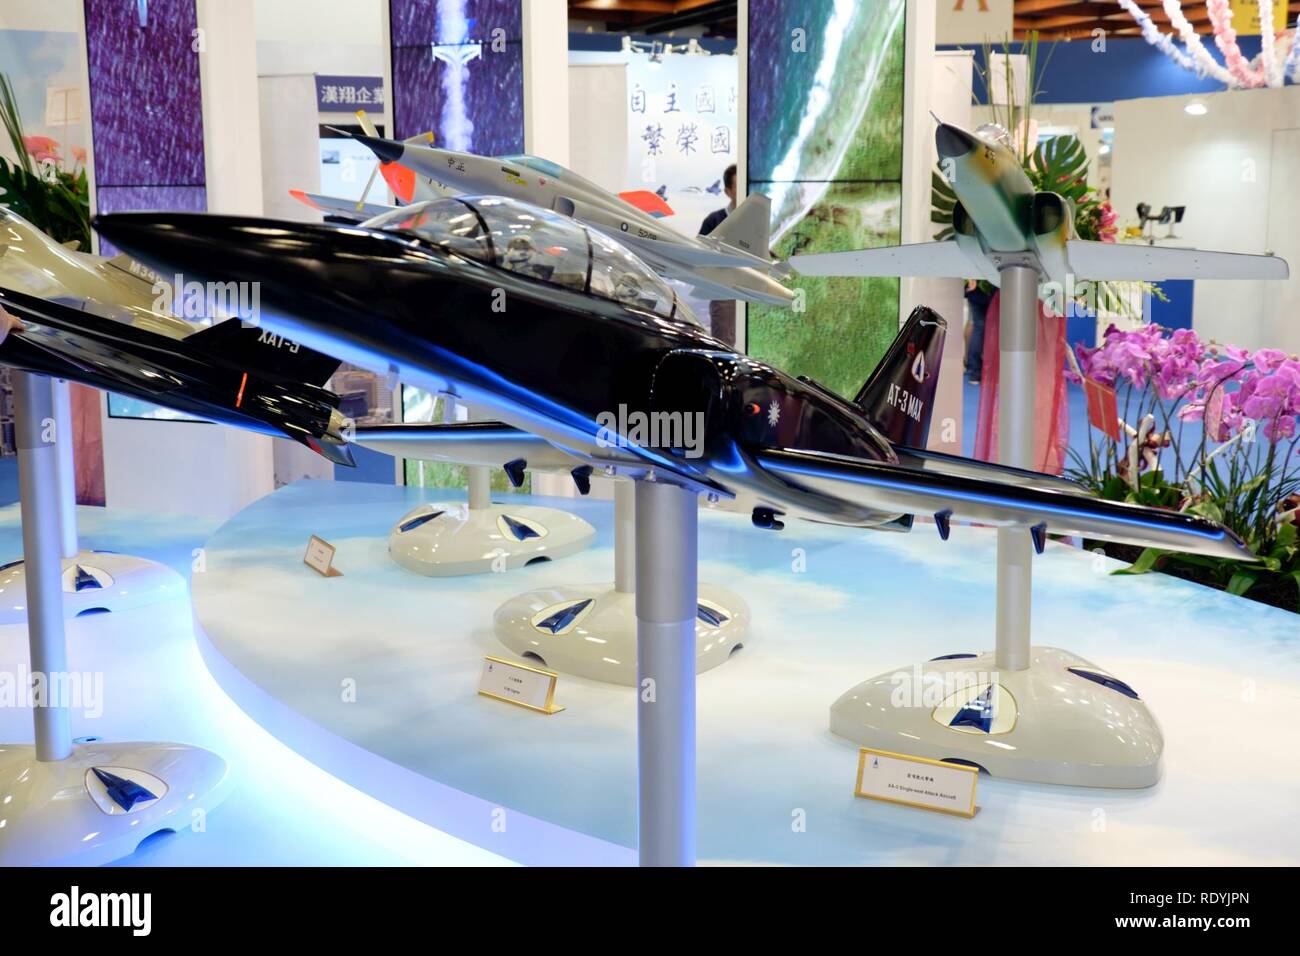 AT-3 Max Advanced Trainer Model Display at AIDC Booth 20150815a. Stock Photo